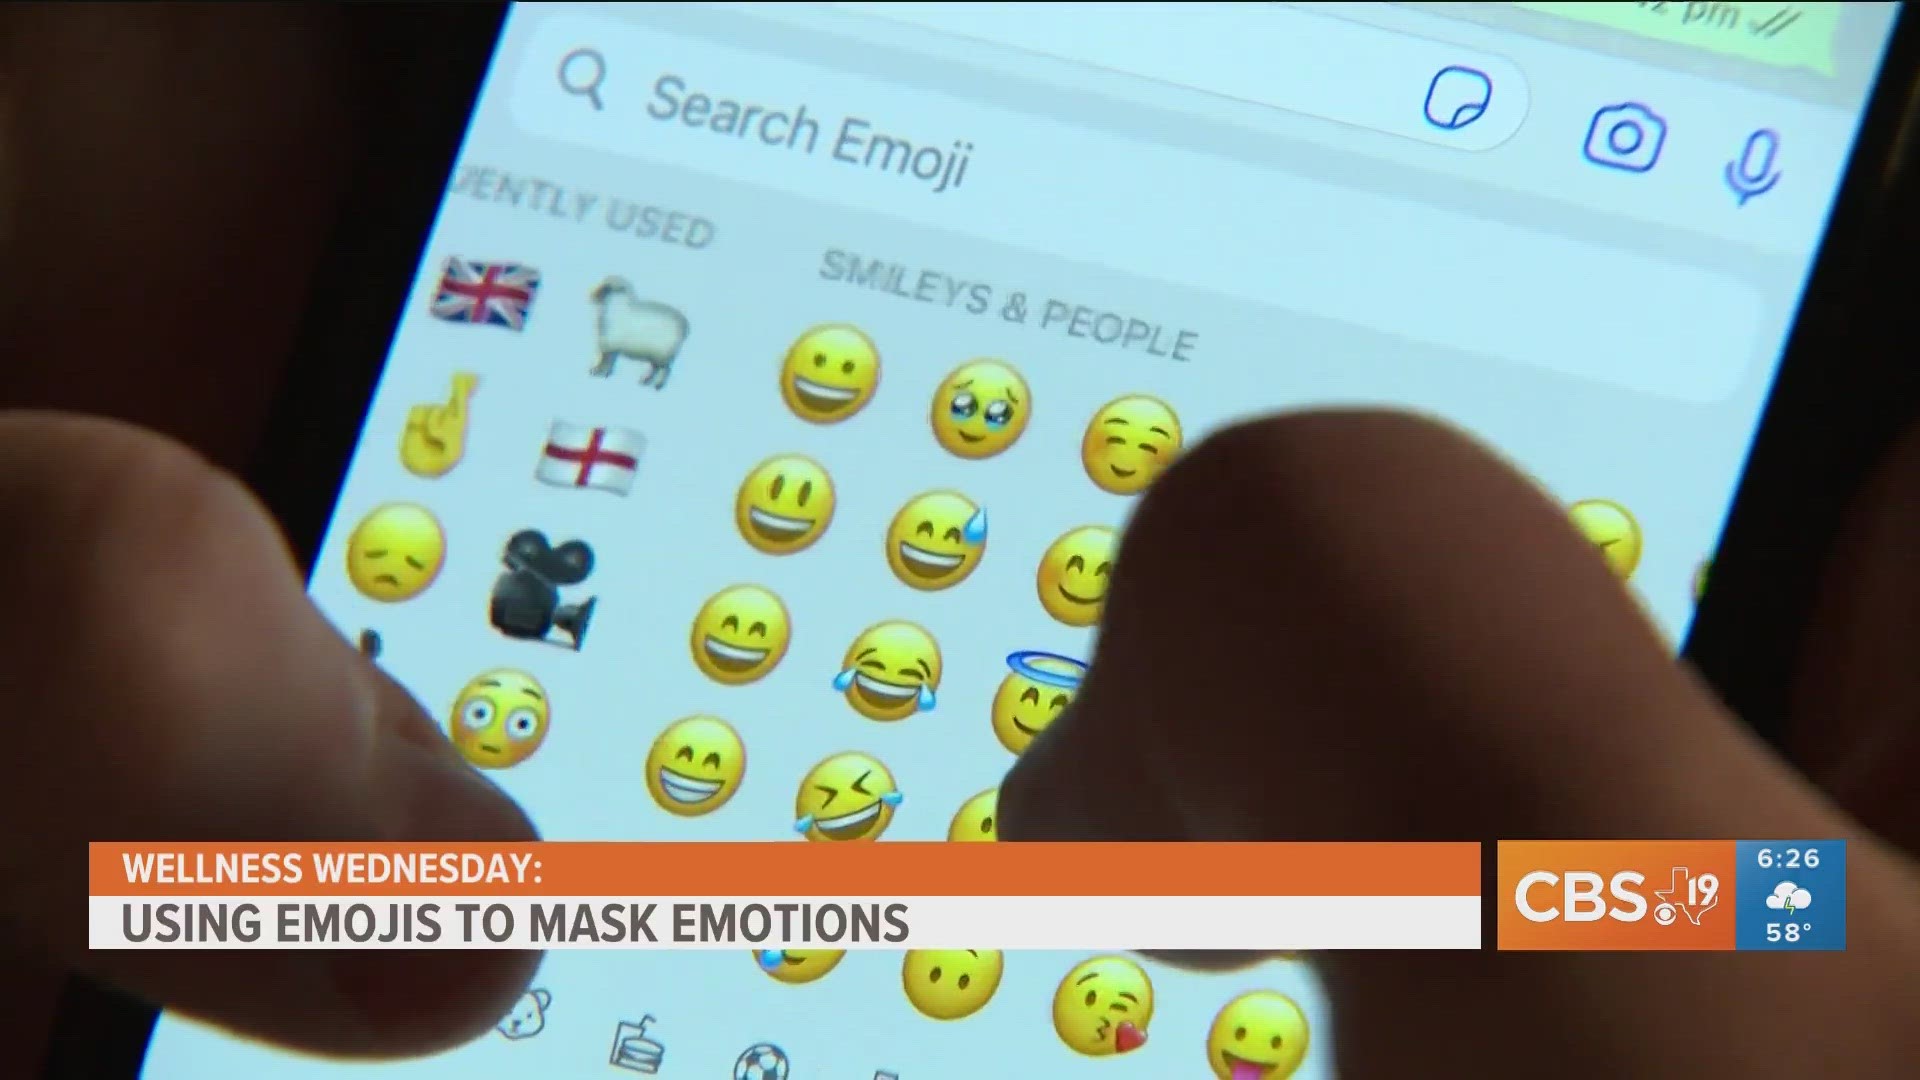 Why emojis may not really represent a person's true emotions.